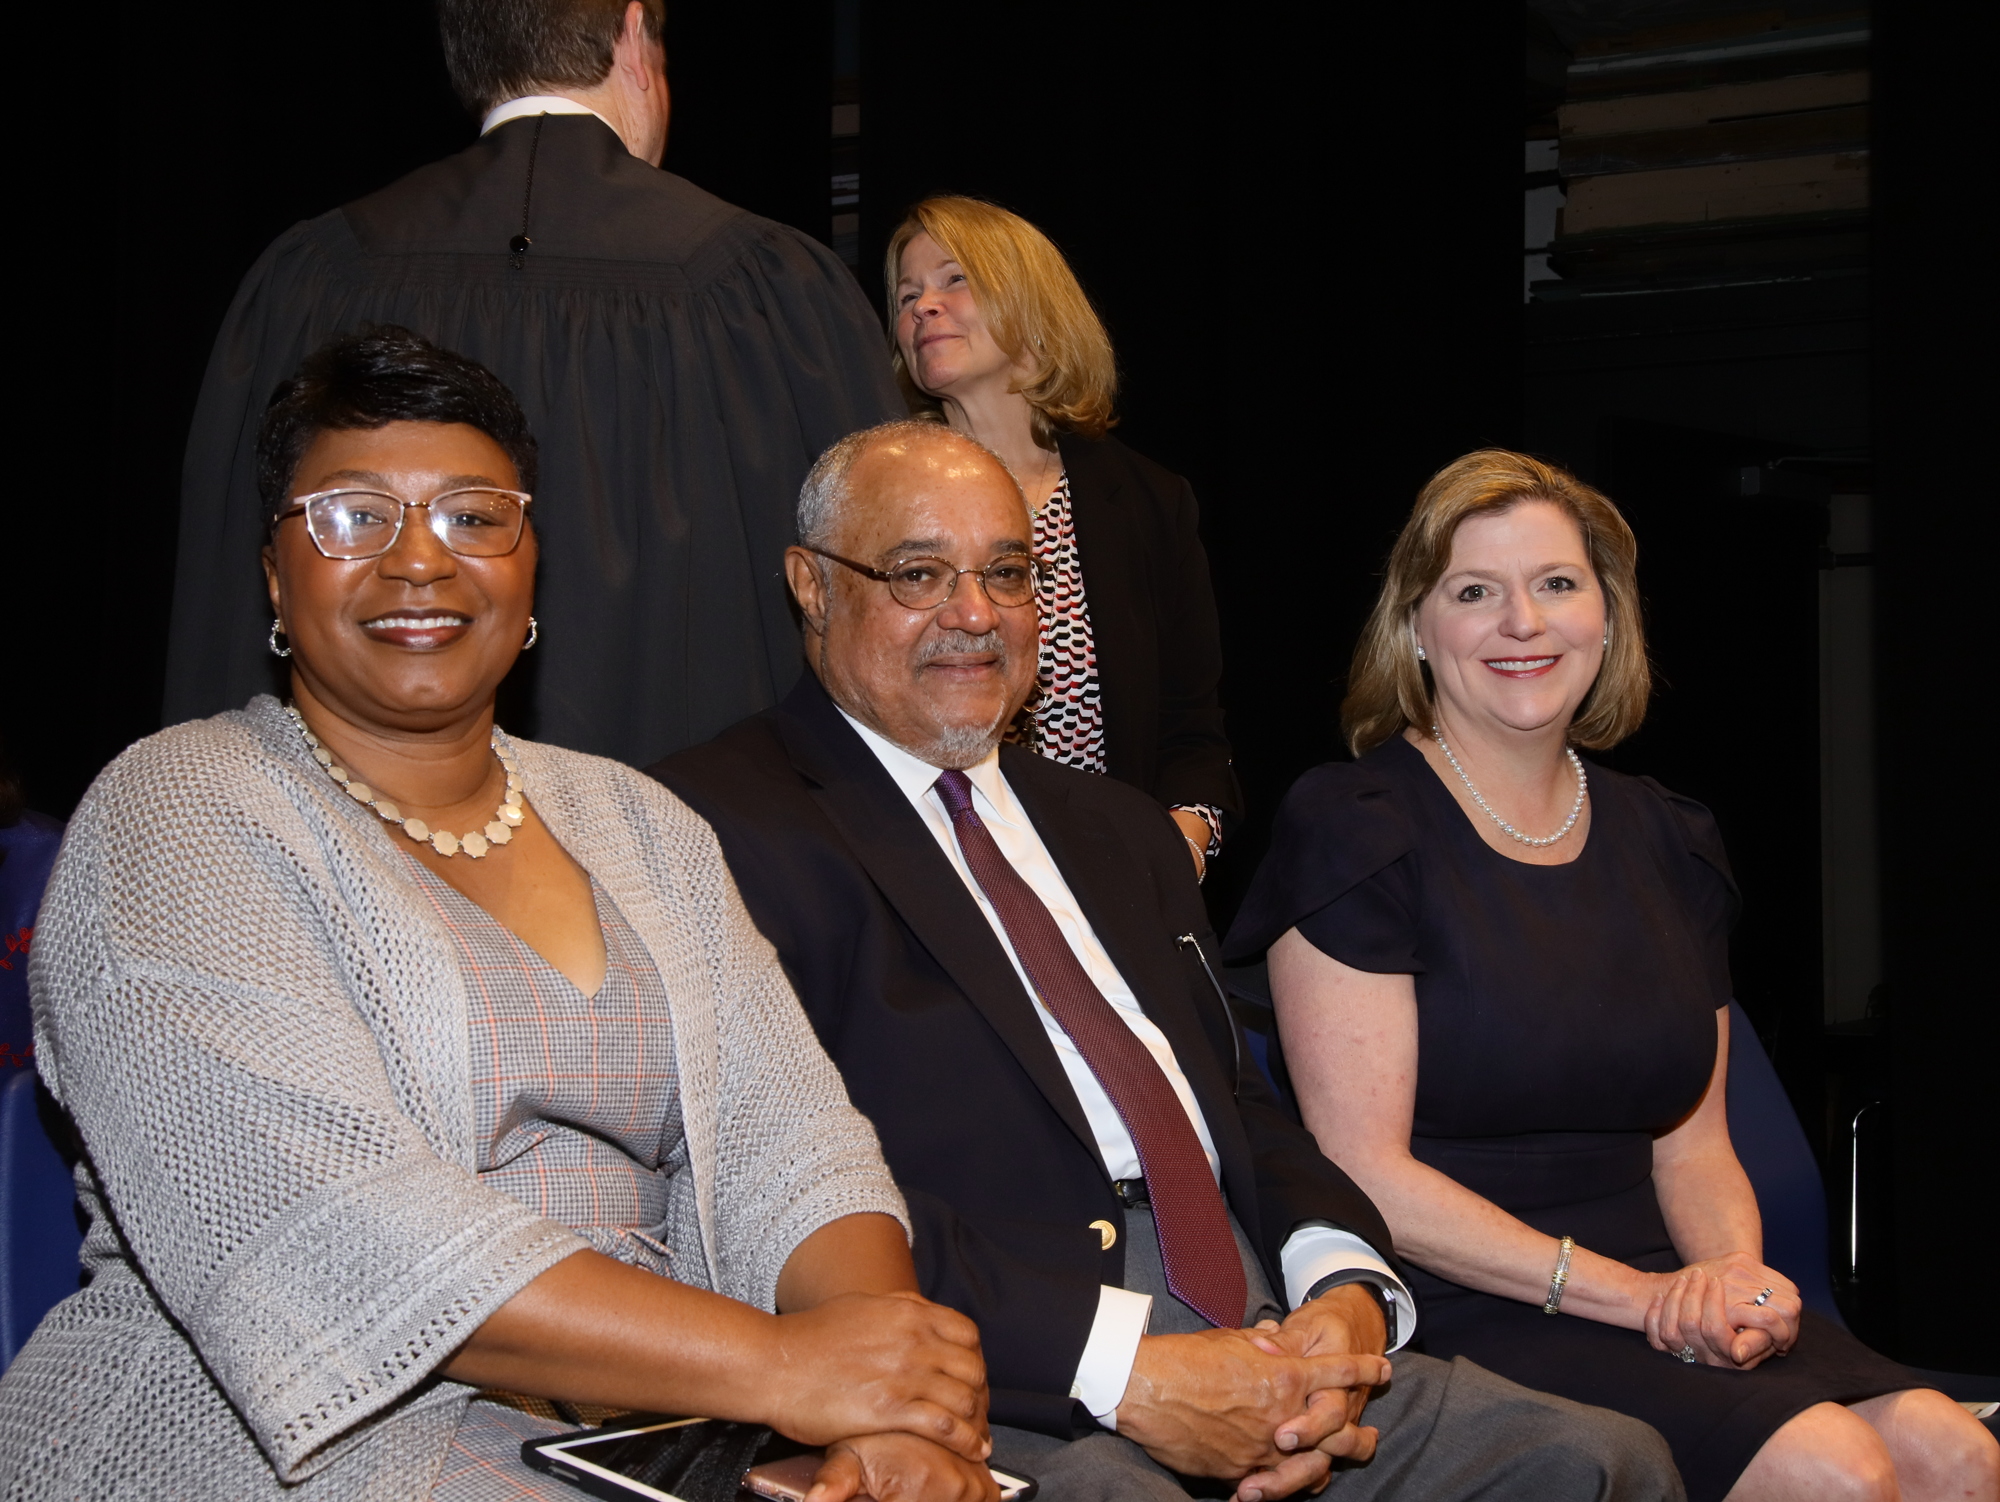 From left, Diana Greene, superintendent of Duval County Public Schools, U.S. District Judge Brian Davis and U.S. District Judge Judge Marcia Morales Howard.